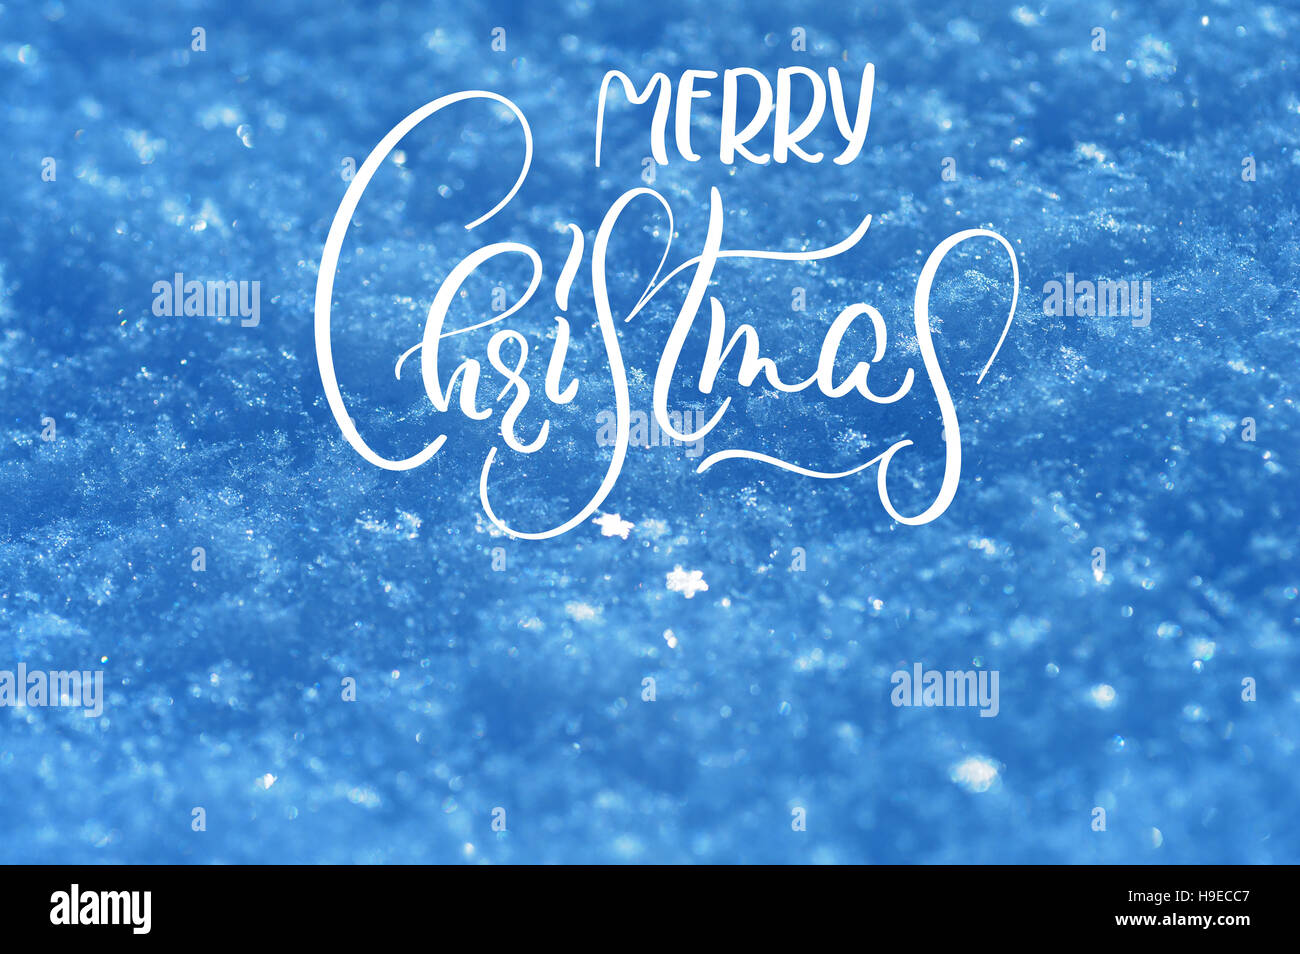 texture of snow in blue tones background with text Merry Christmas. Calligraphy and lettering Stock Photo